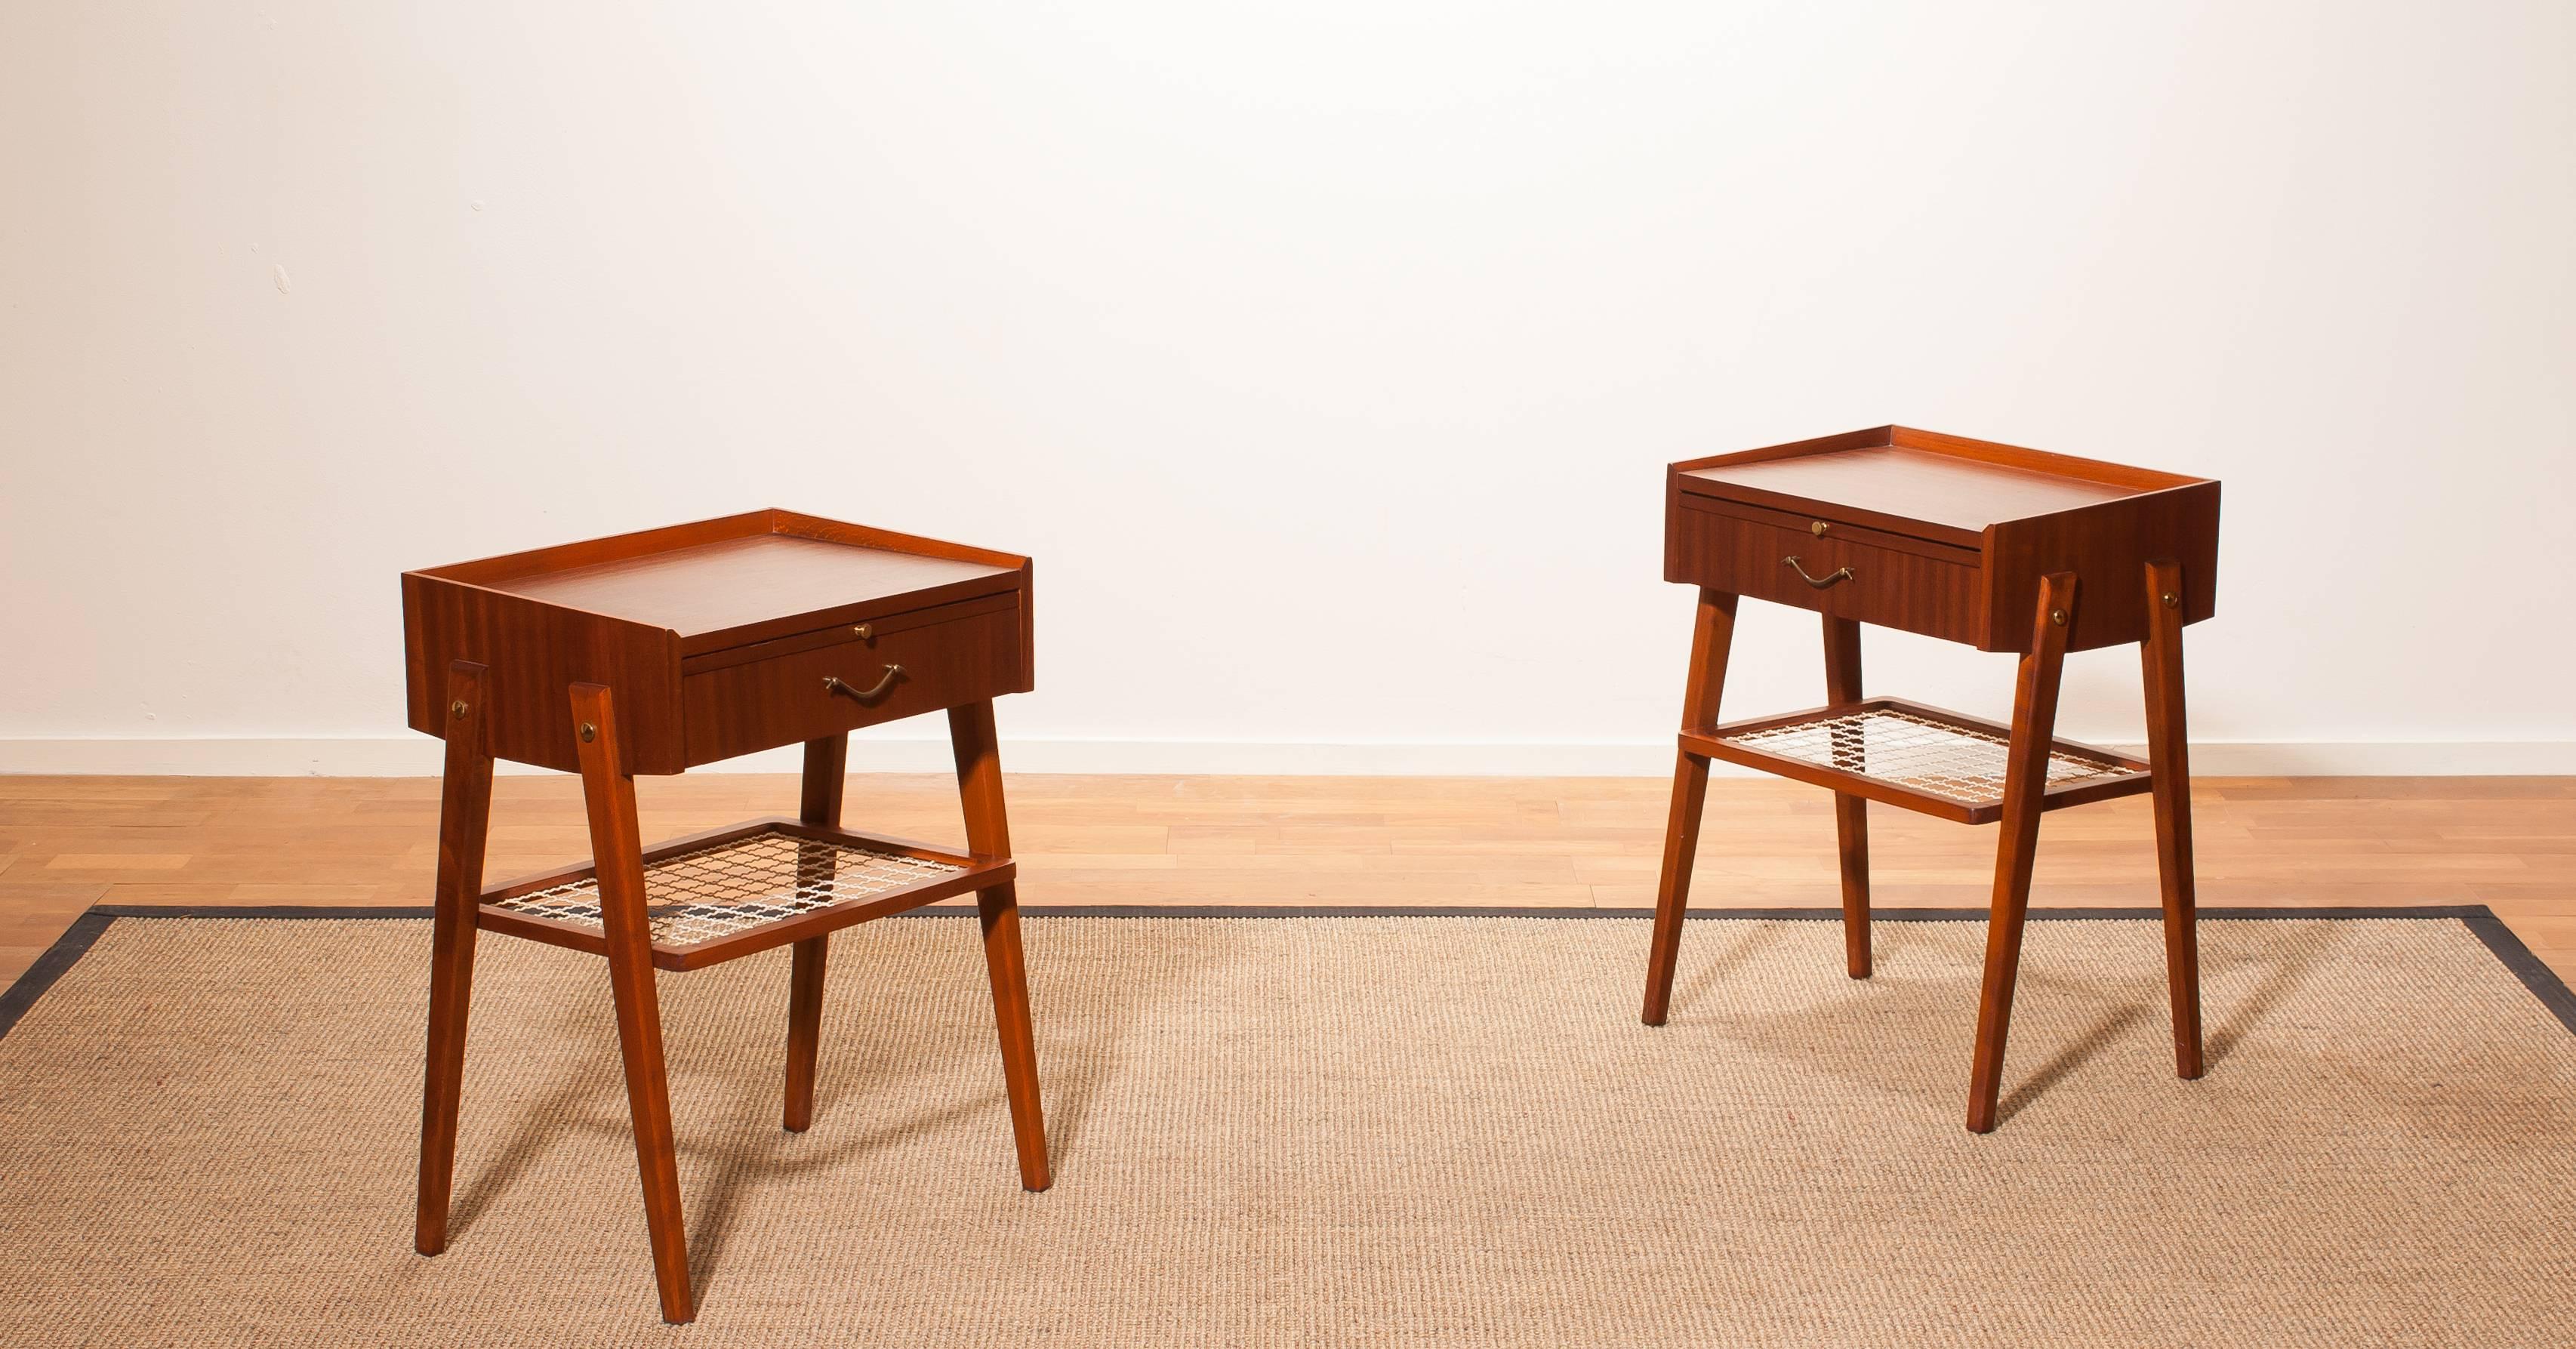 A pair of lovely teak bedside tables.
Each table has a drawer and a extendable leaf with a brass handle.
They are in a nice vintage condition.
Period 1960s
Dimensions: H 60 cm, W 45cm, D 33 cm.